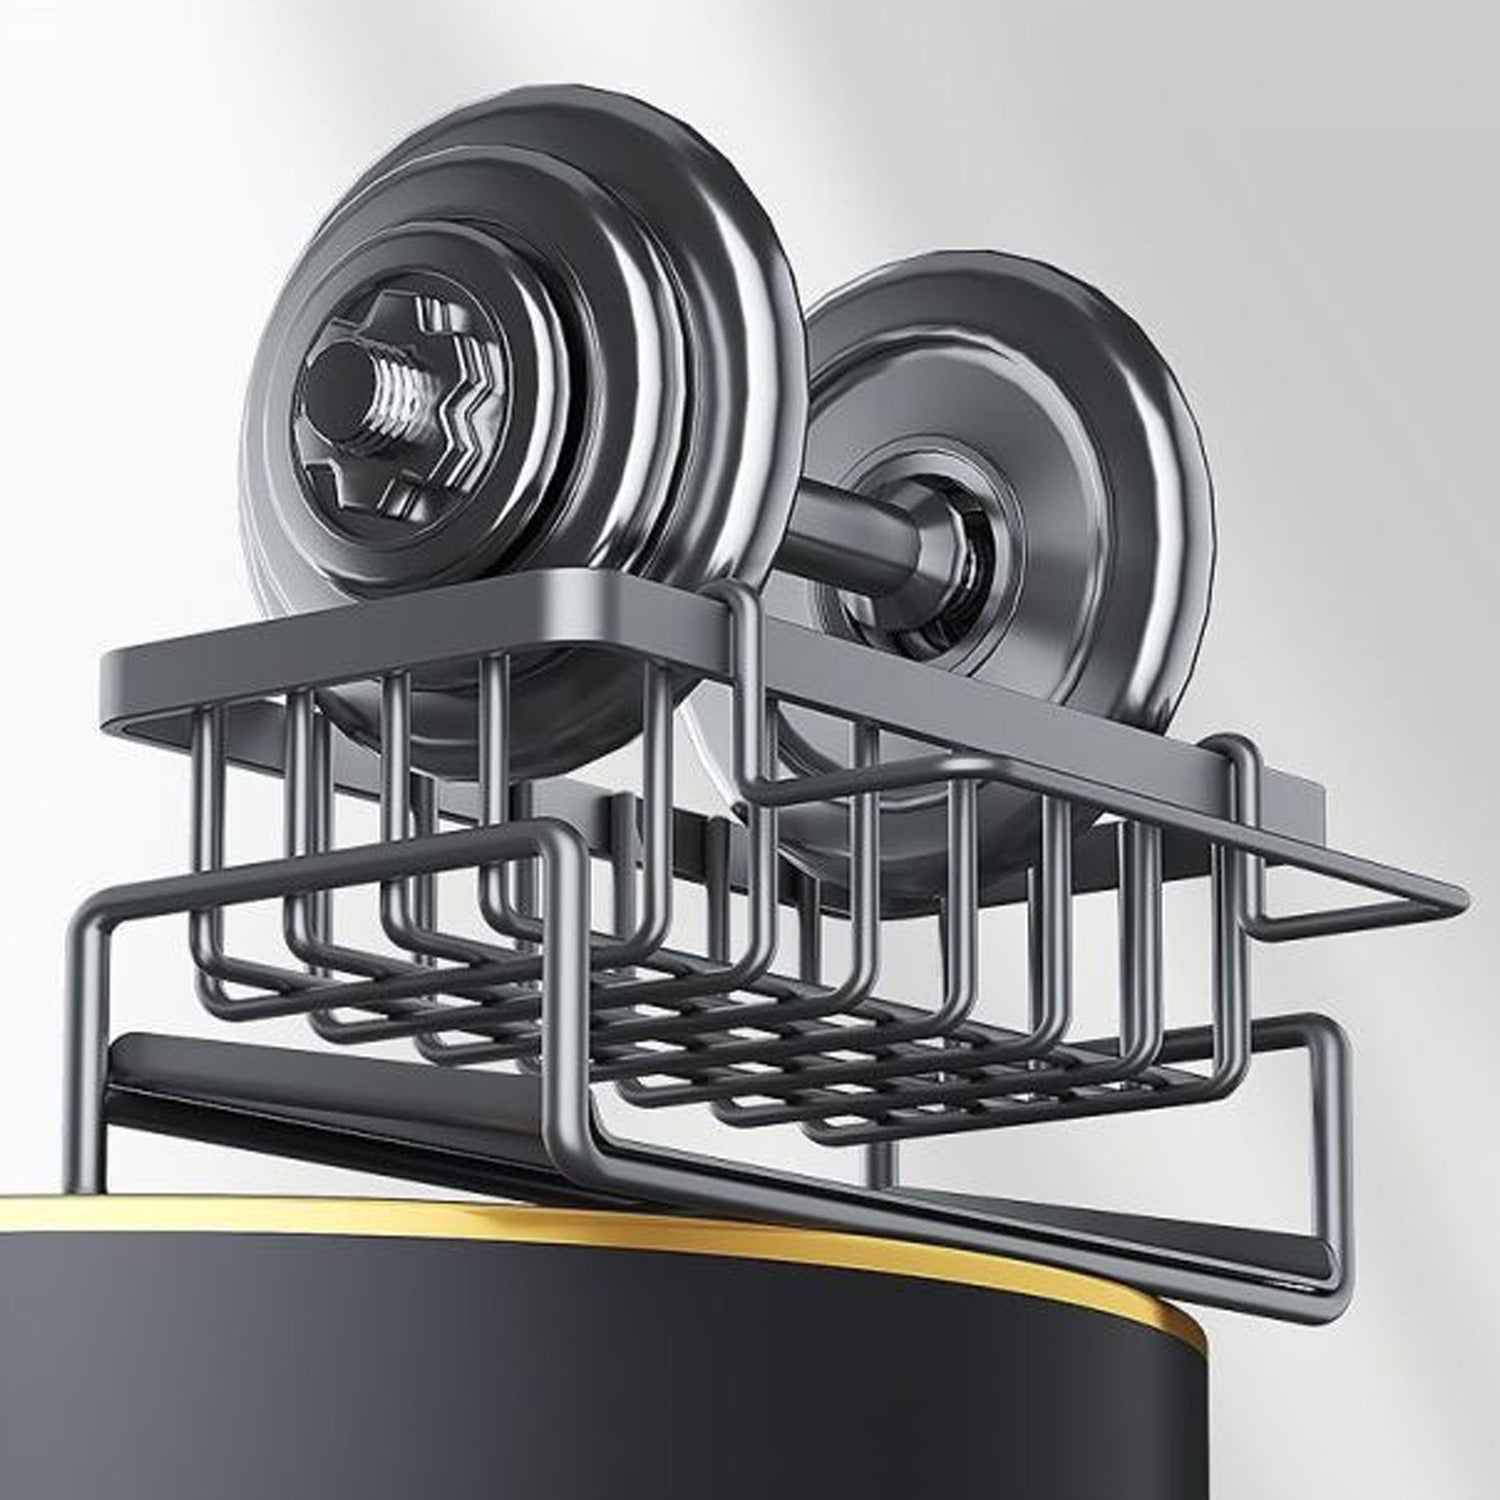 A close-up view of the Rustproof Stainless Steel Sink Organizer Rack